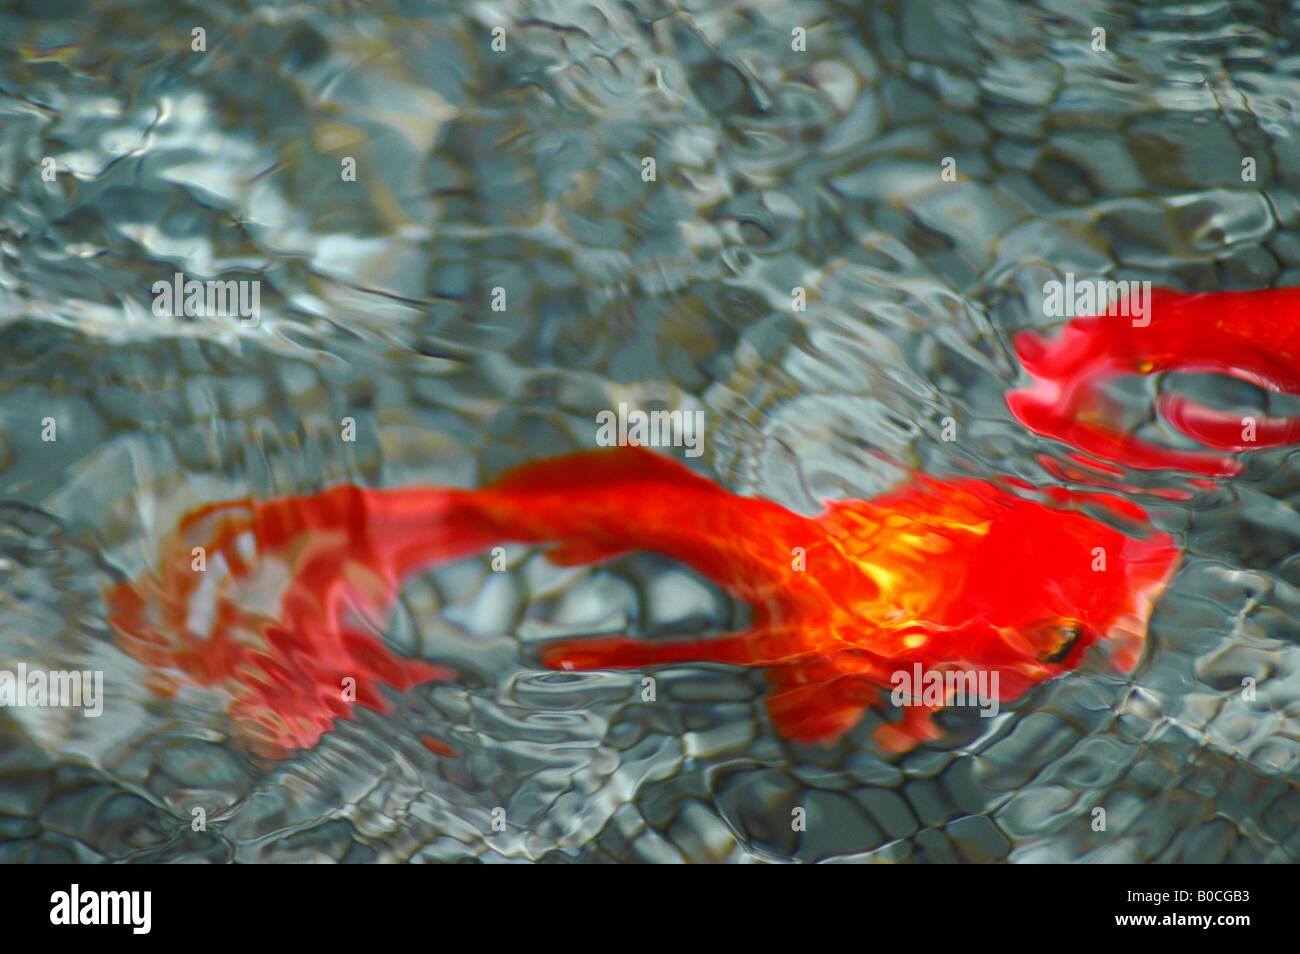 refracted image of red fish Stock Photo